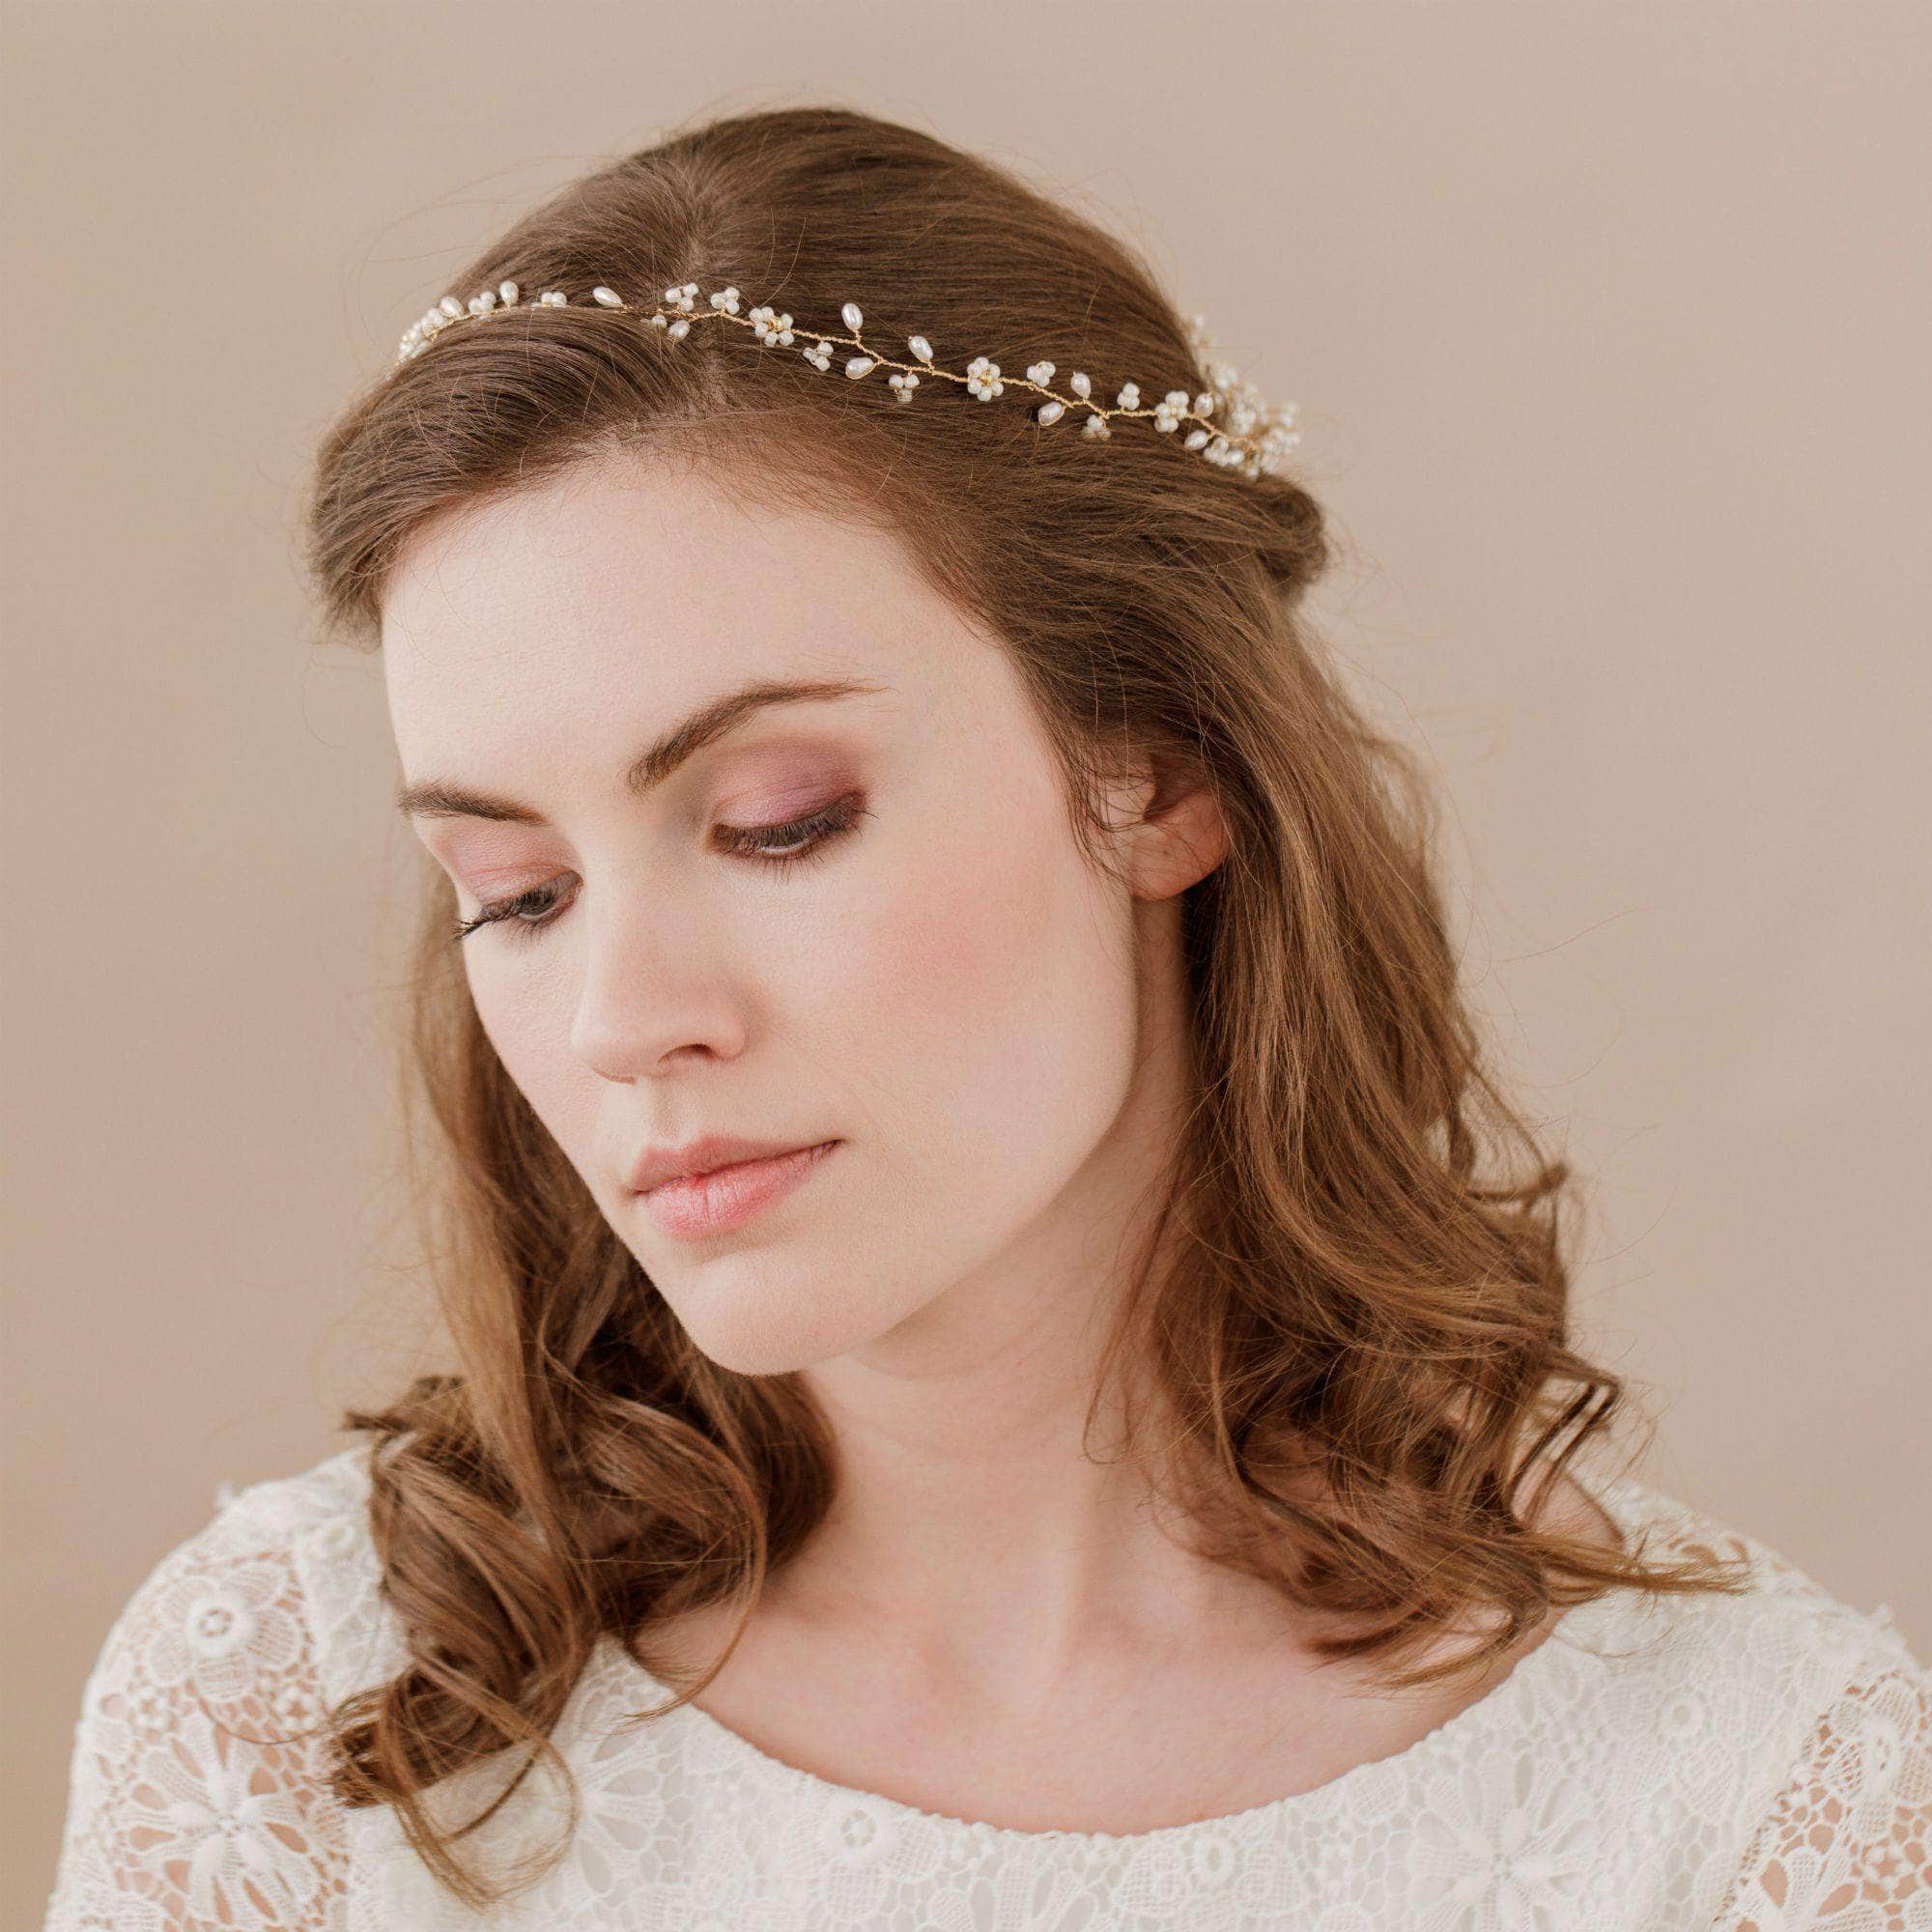 How To Choose A Bridal Headpiece